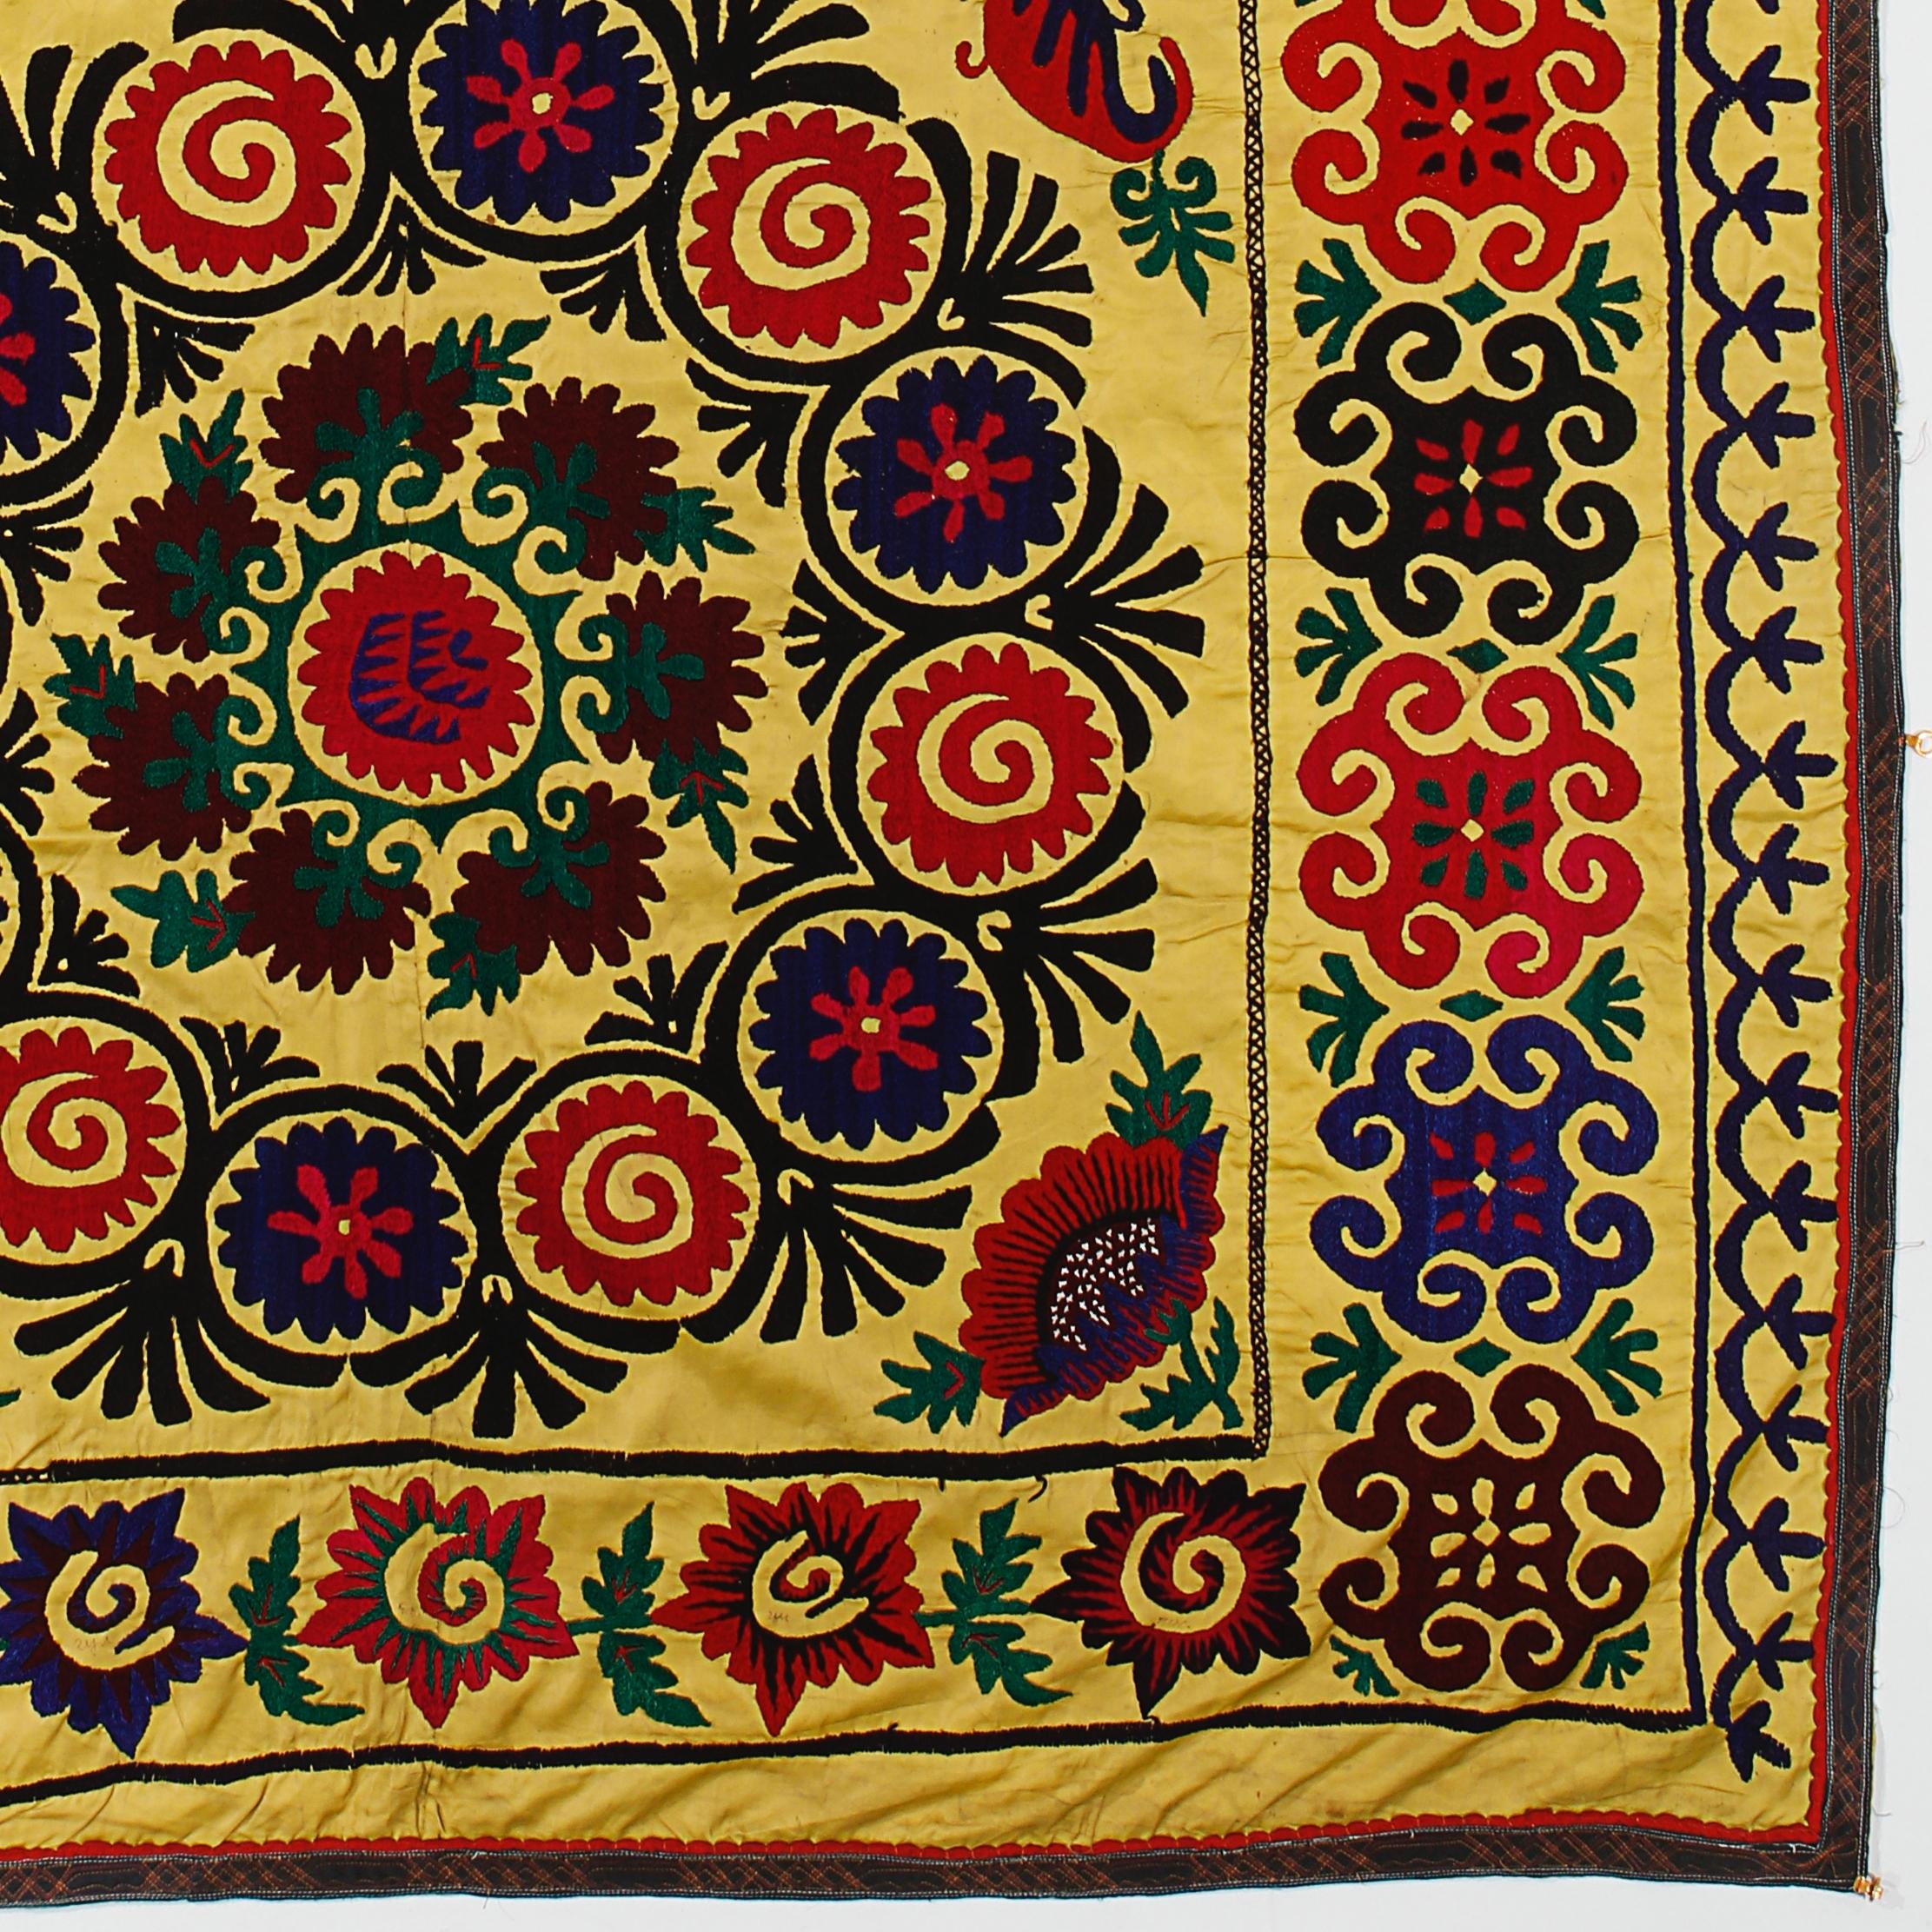 Uzbek 5.5x7.6 Ft Needlework Bedspread in Yellow. Wall Decor Fabric. Embroidered Throw For Sale